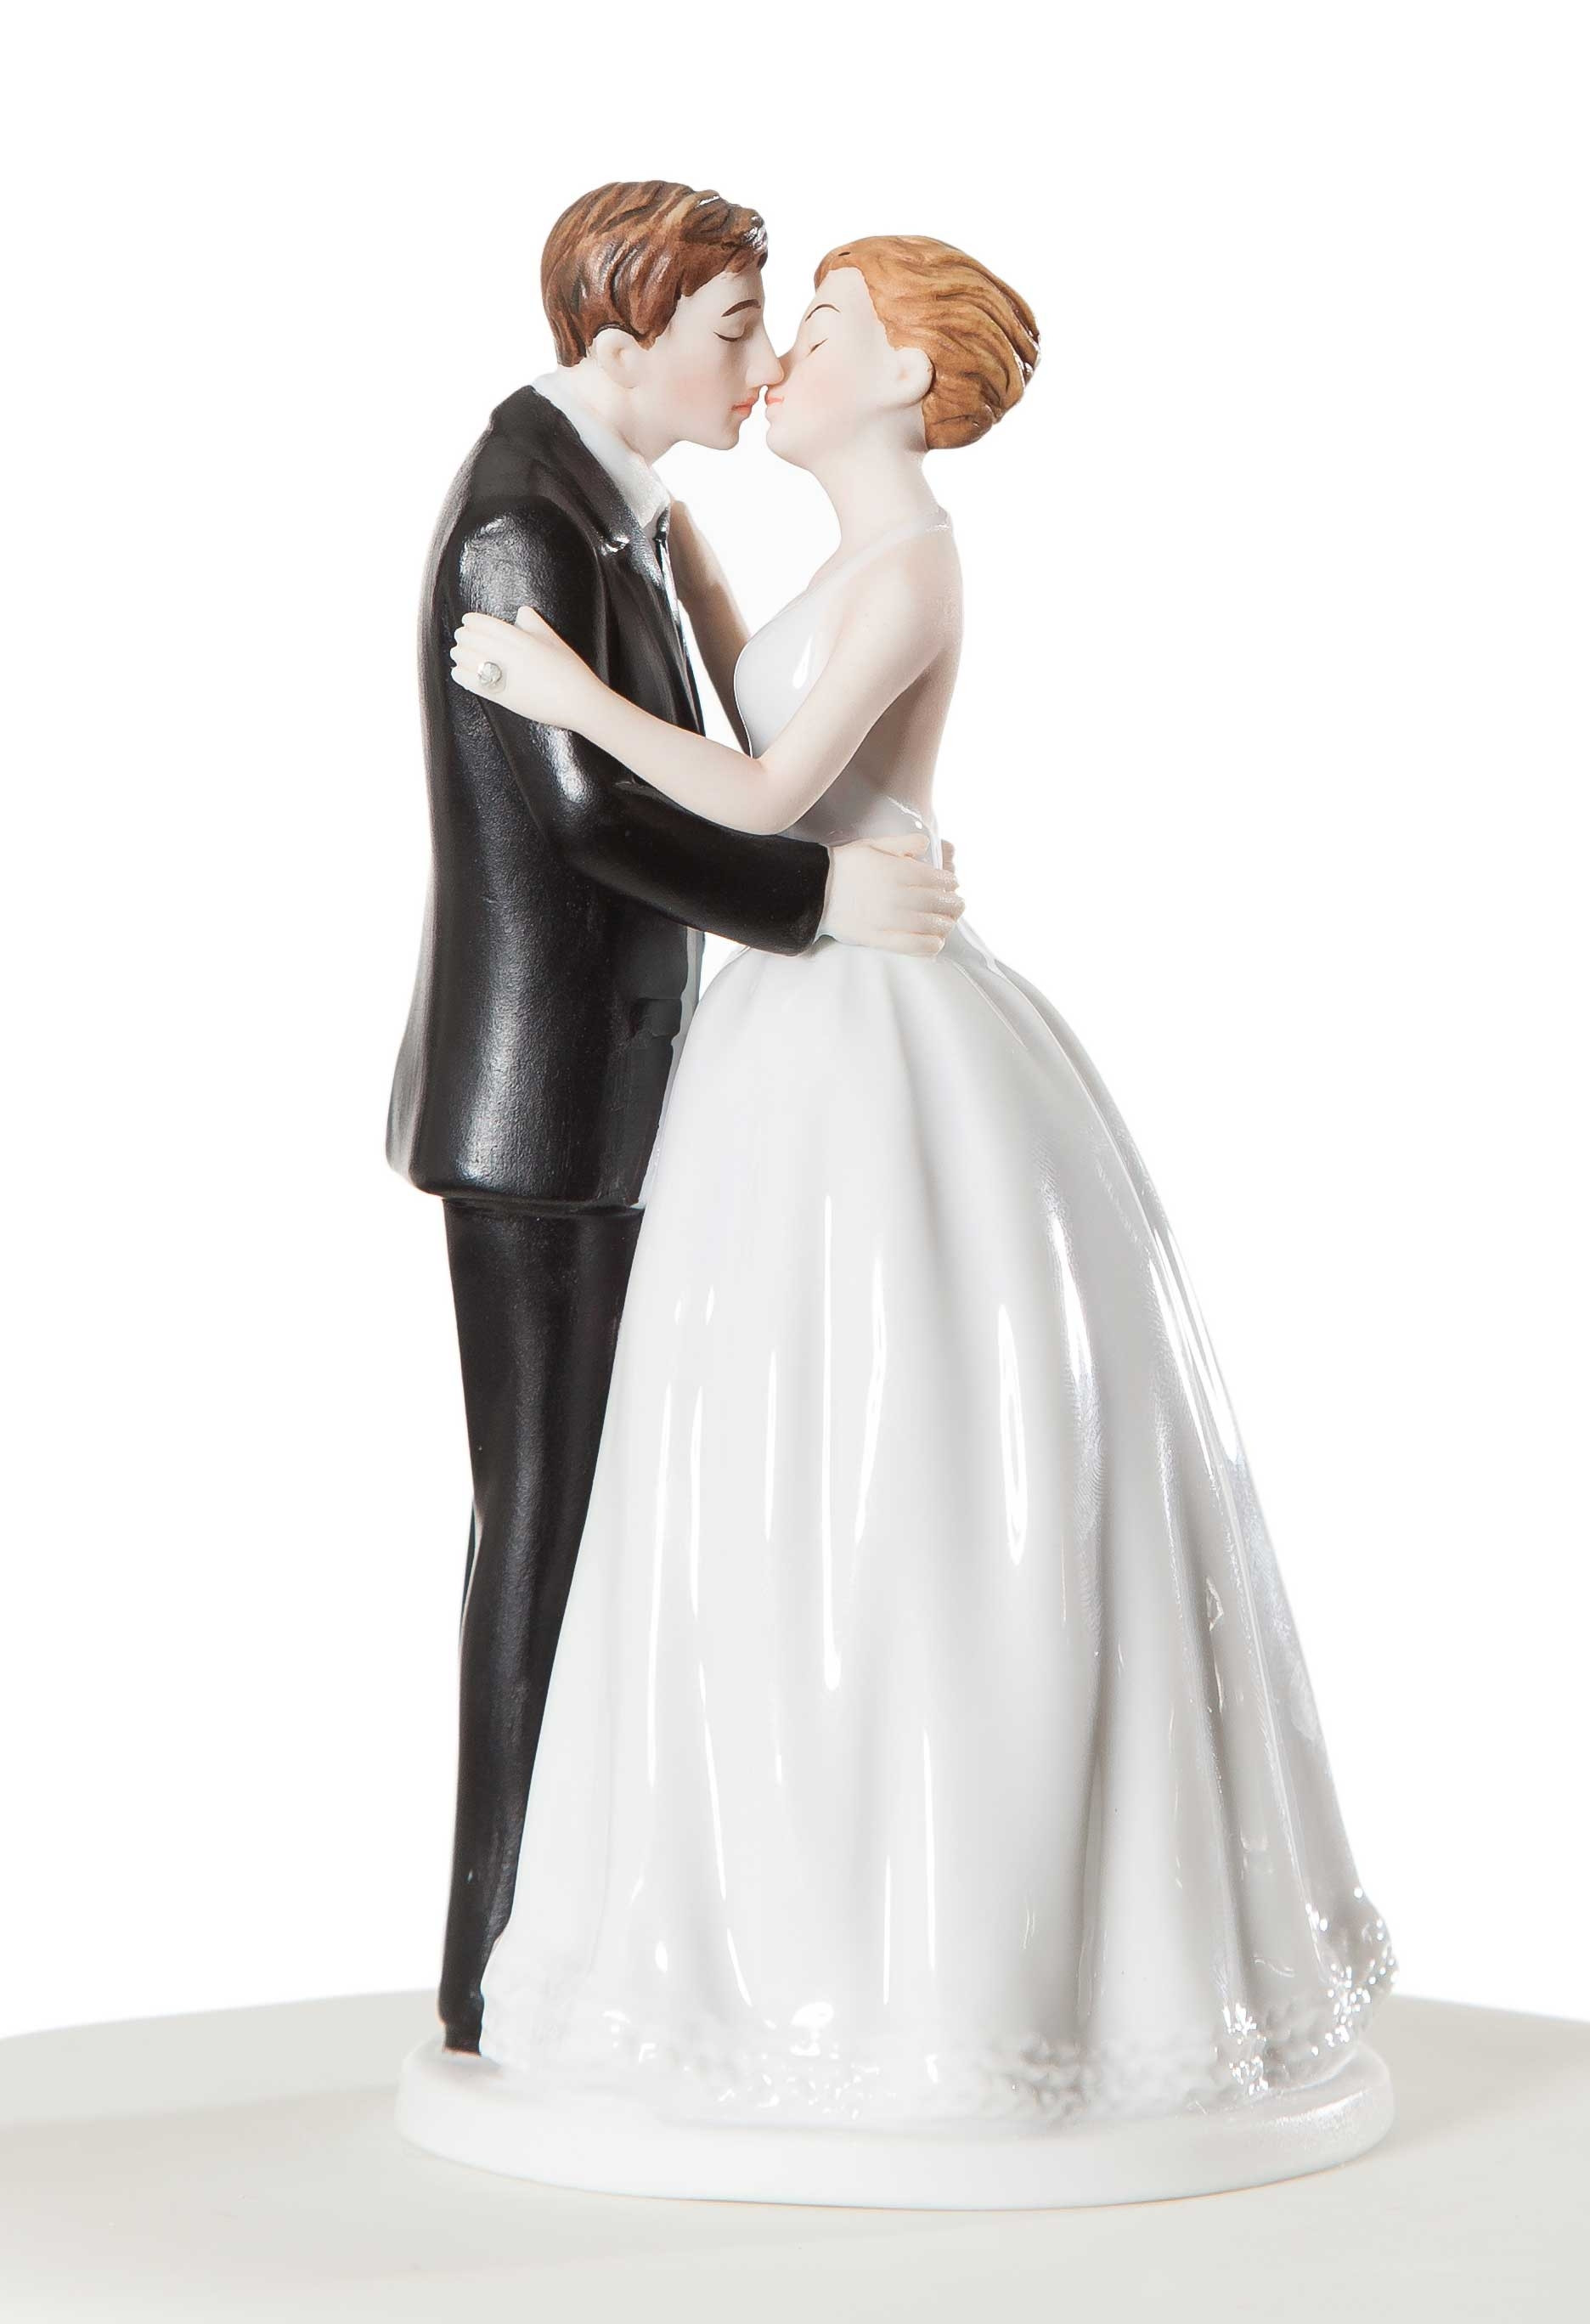 Wedding Cakes Toppers
 Vintage Style Wedding Cake Toppers